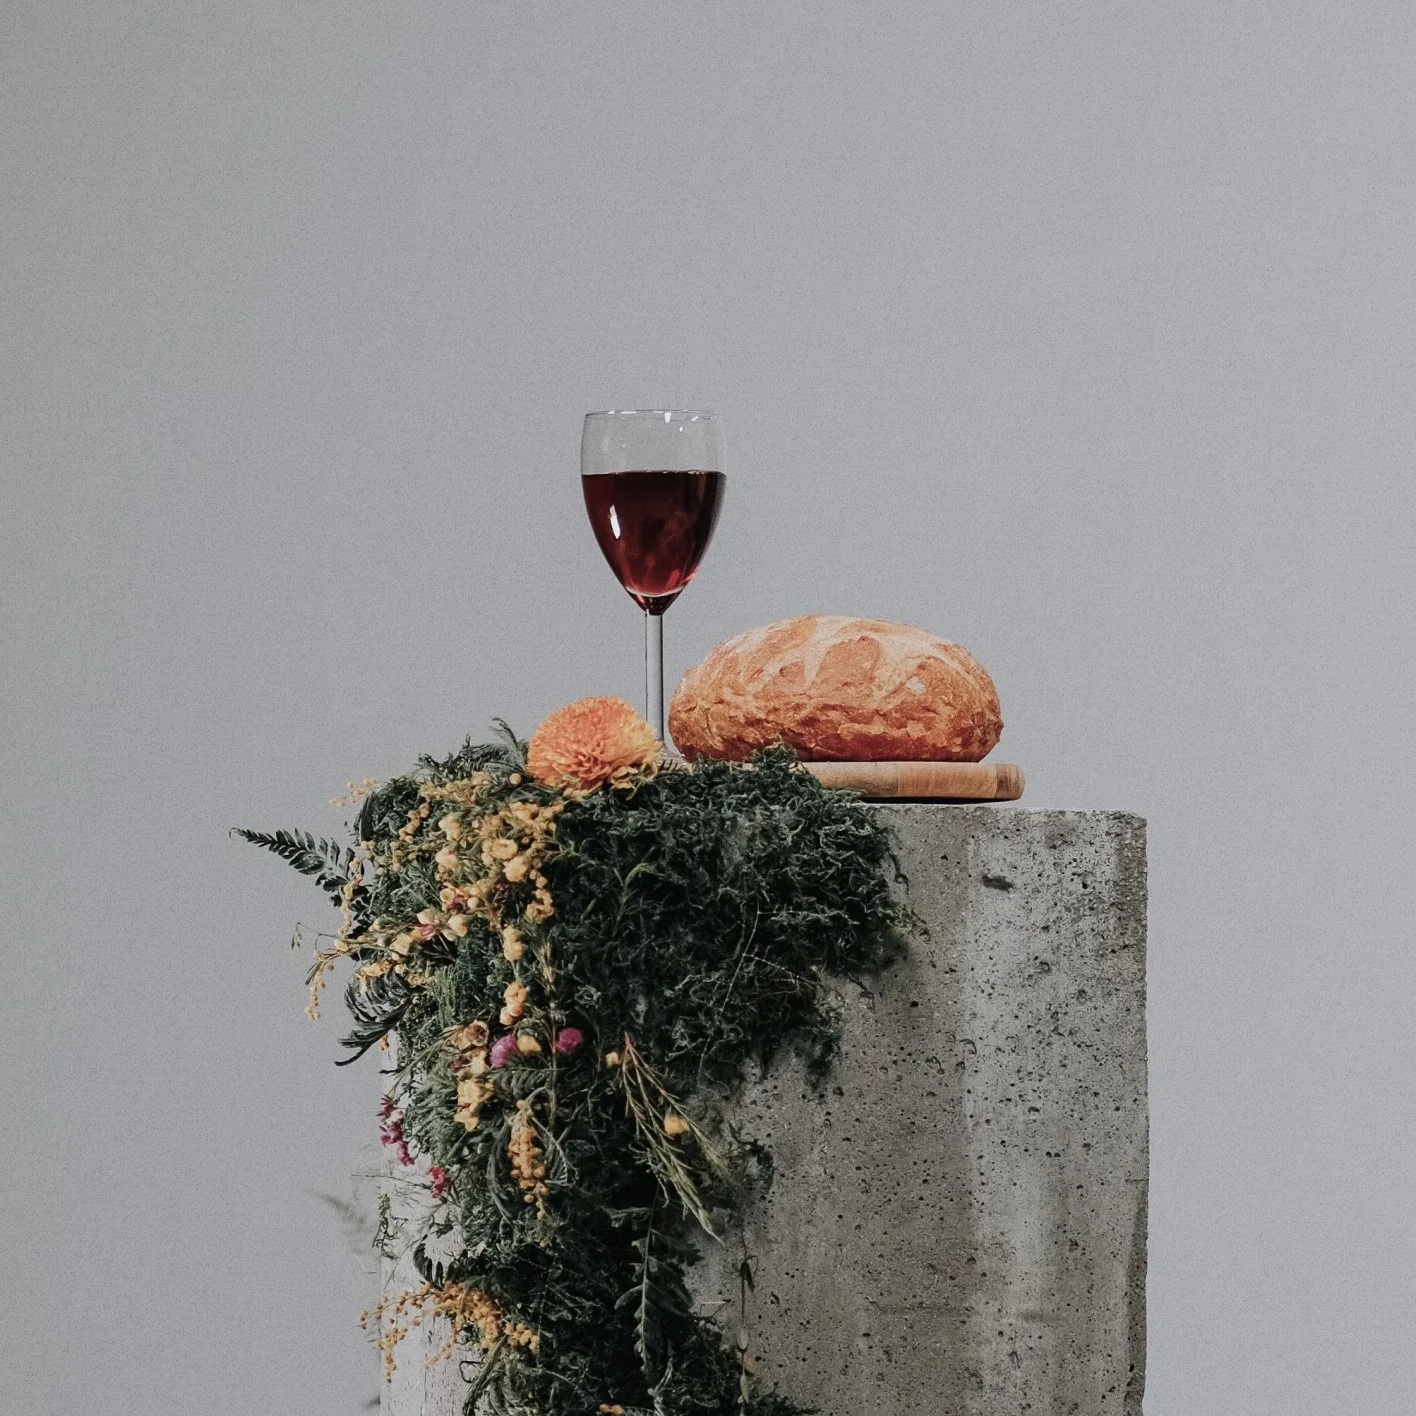 Wine and bread on stone table